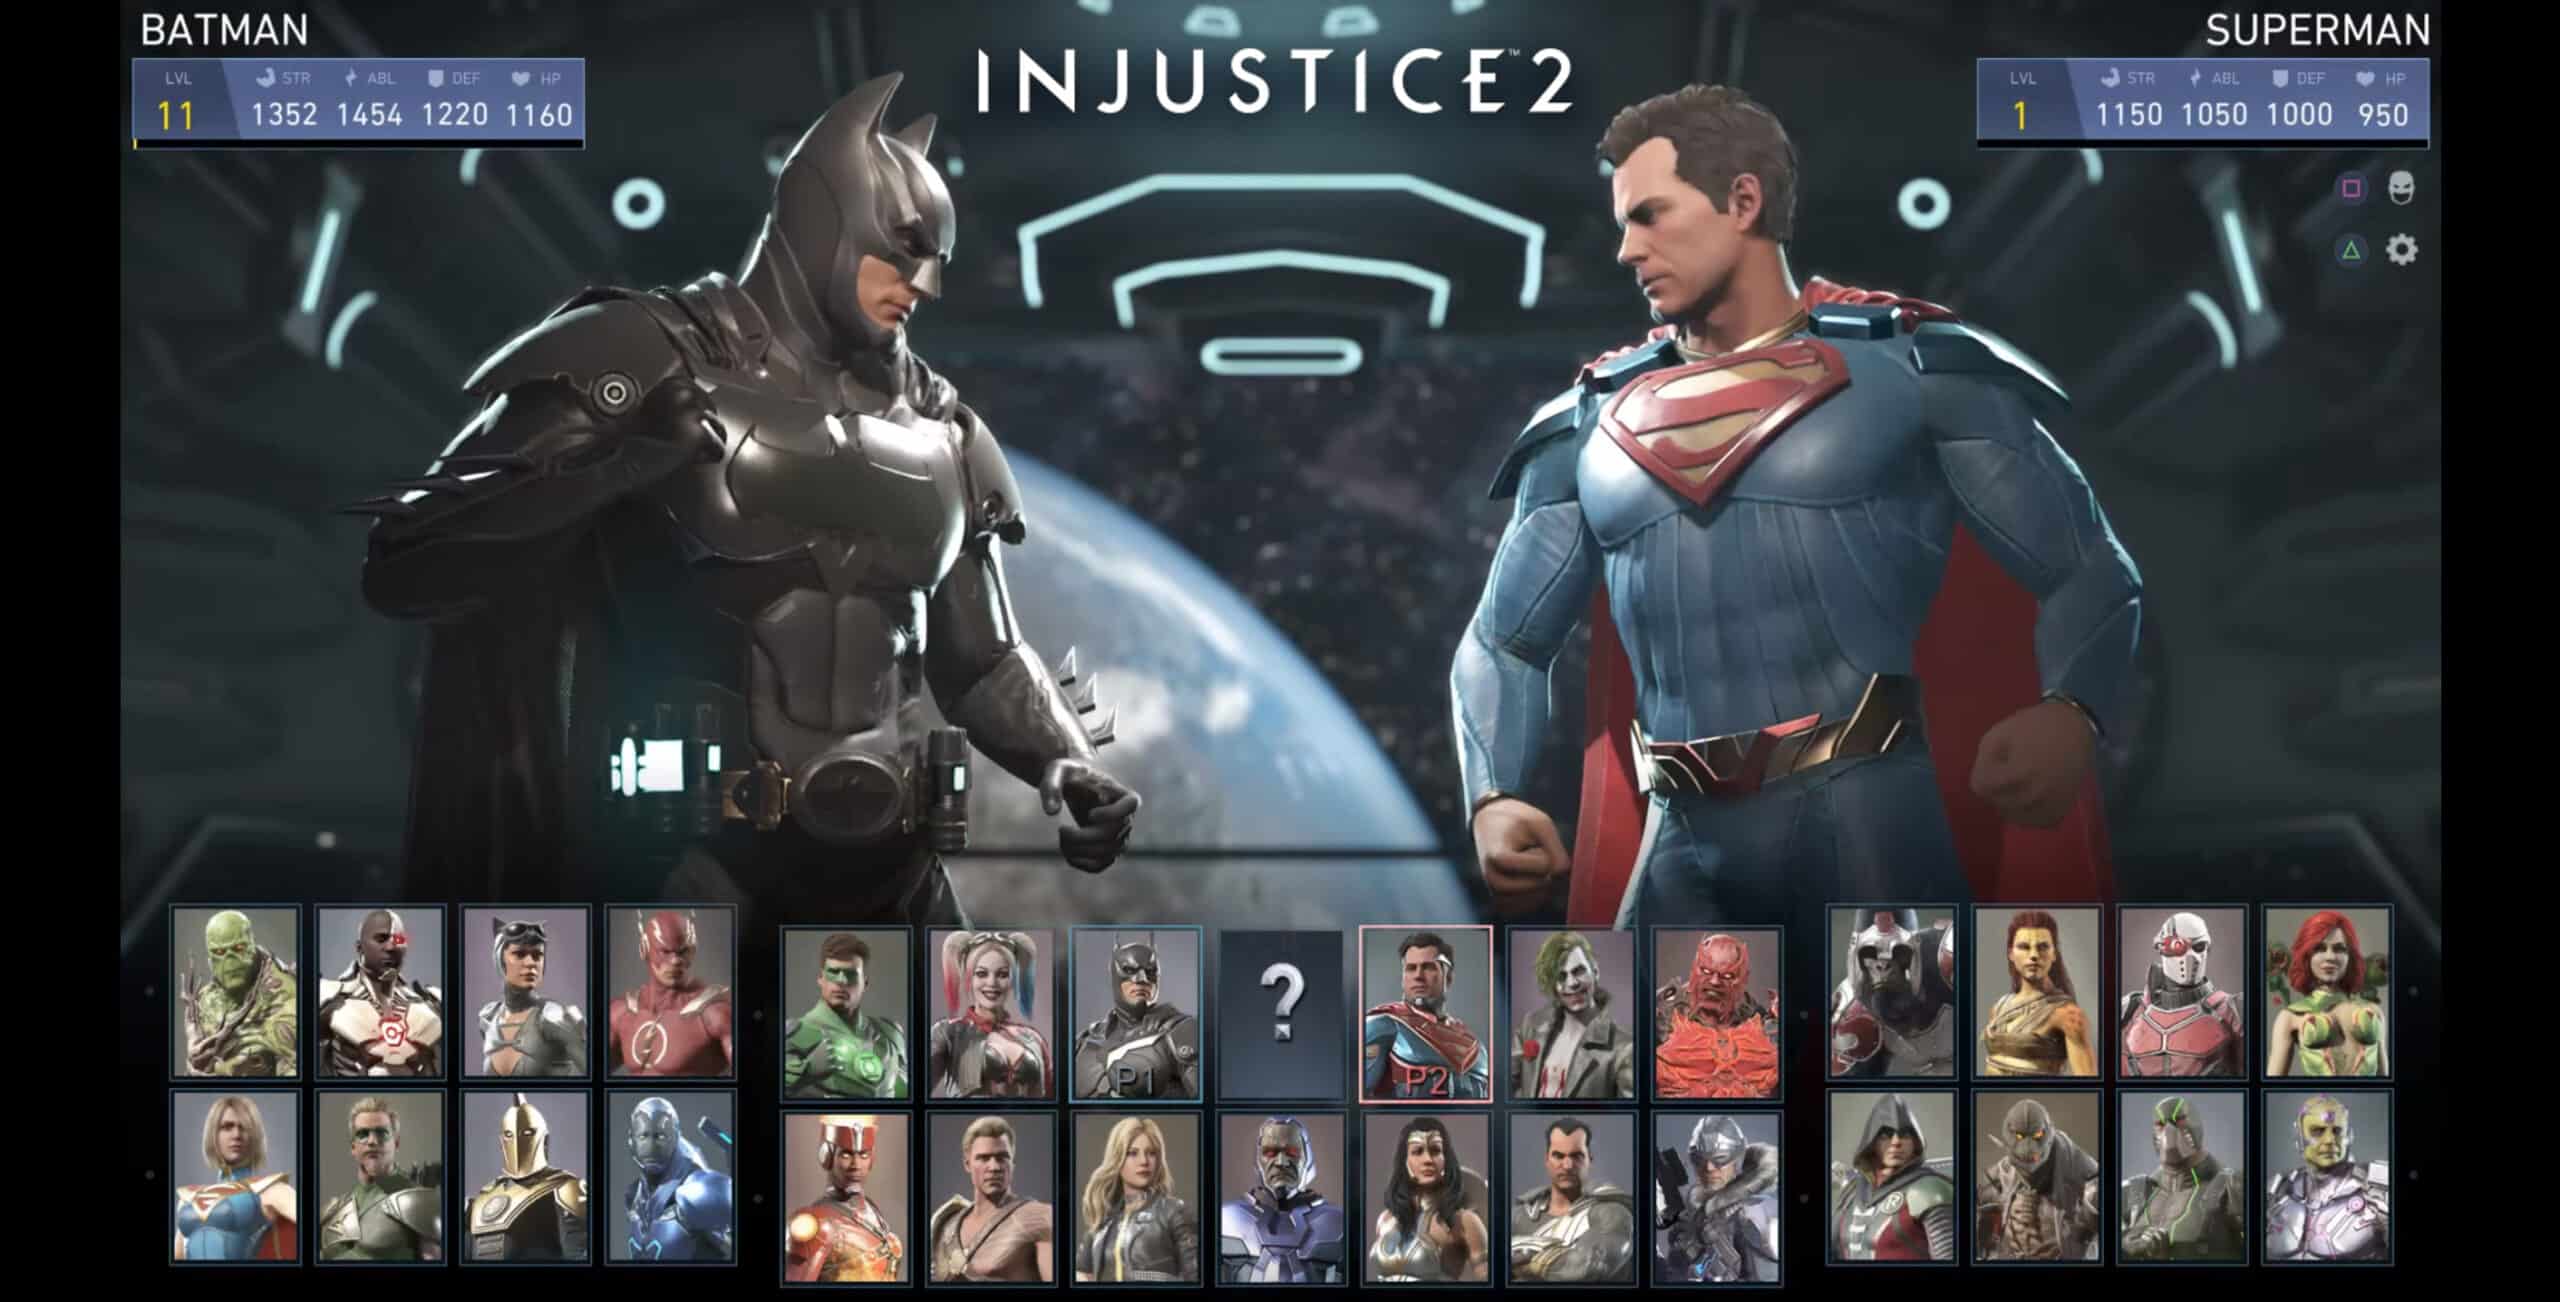 How To Unlock All Injustice 2 Characters - 2824 x 1436 jpeg 930kB